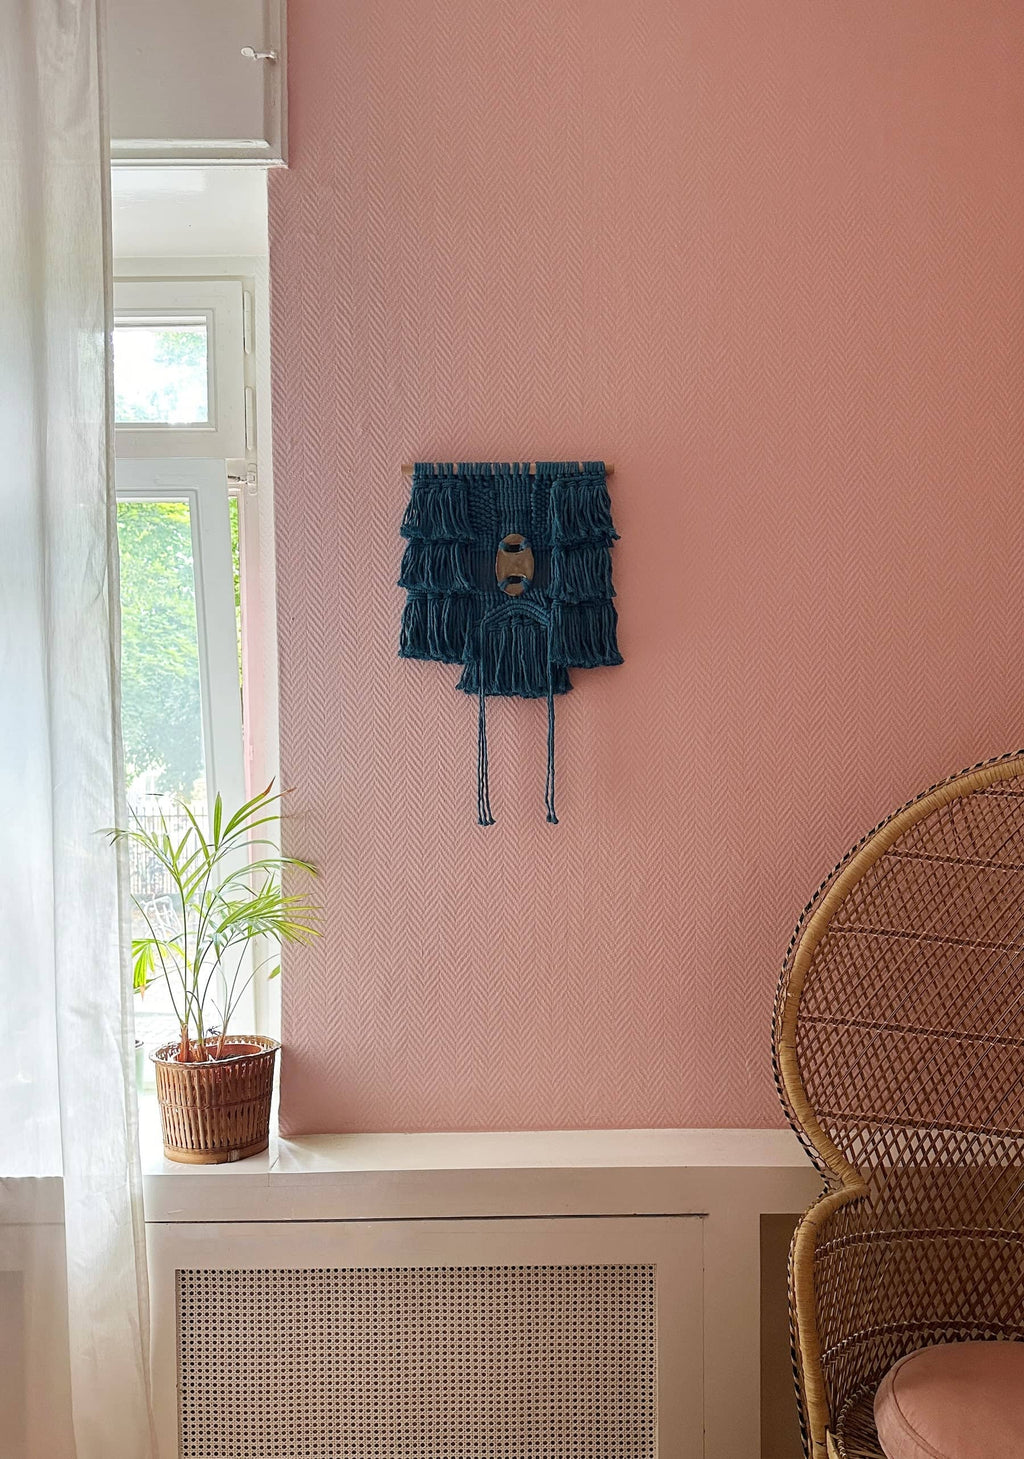 MONTEREY knotted Wall Hanging with Ceramic Detail | indigo blue